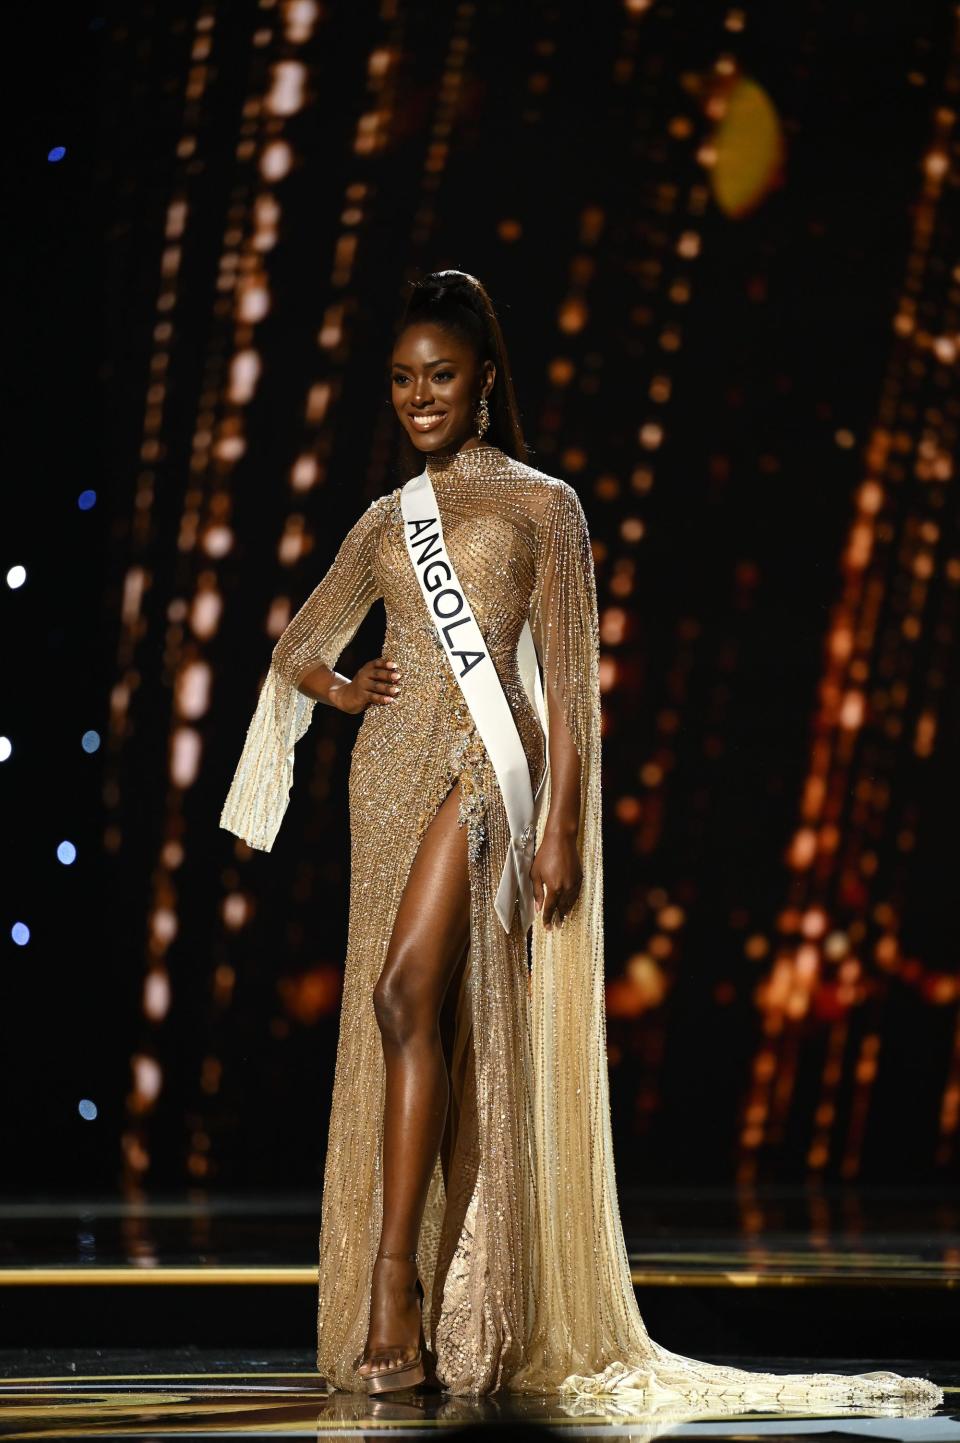 Miss Angola competes in the 71st Miss Universe pageant.